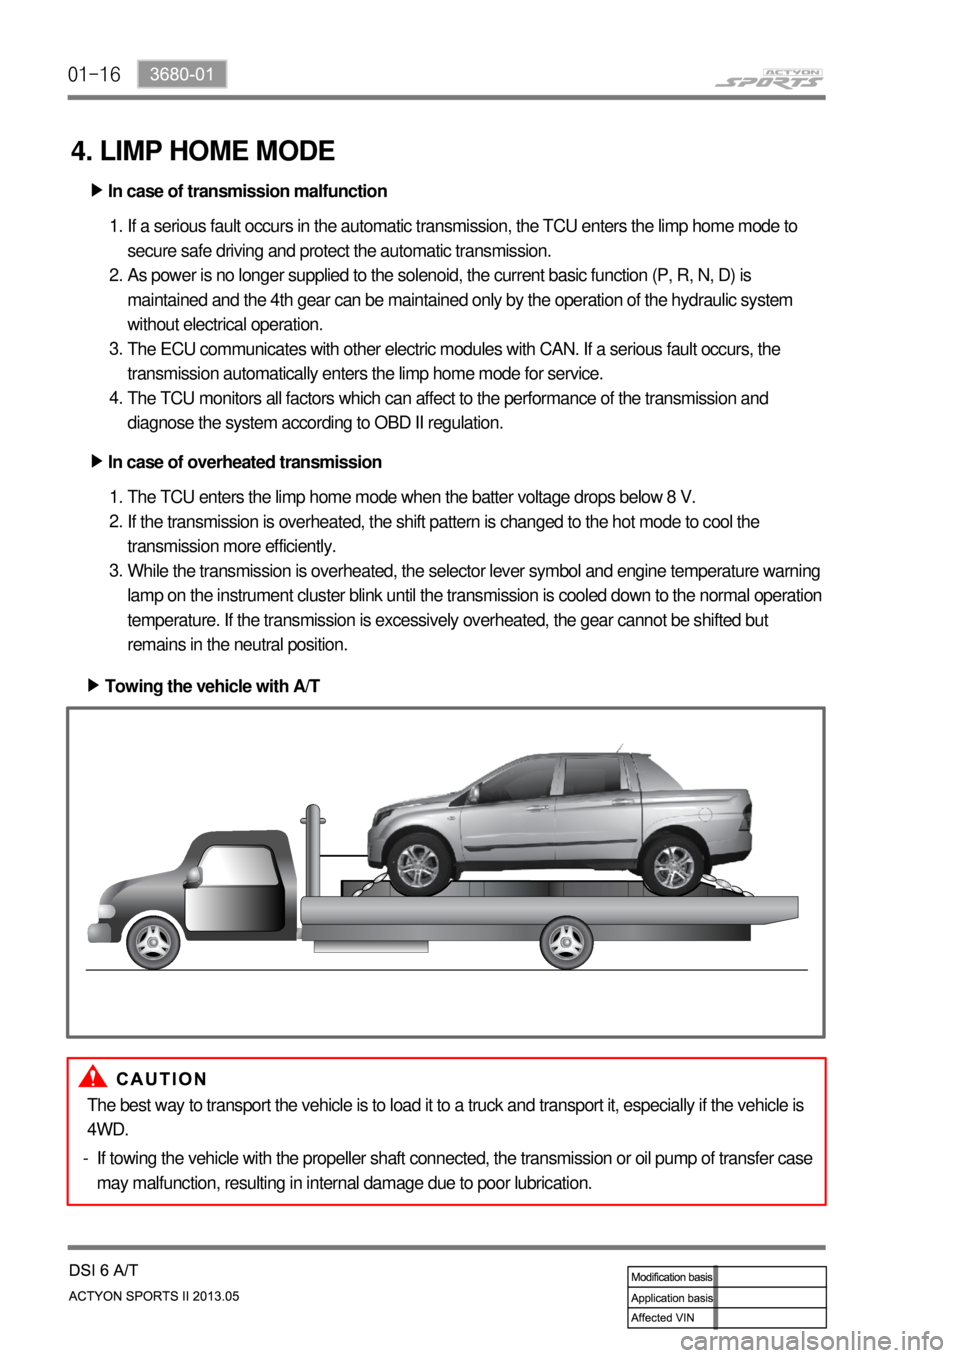 SSANGYONG NEW ACTYON SPORTS 2013  Service Manual 01-16
4. LIMP HOME MODE
In case of transmission malfunction ▶
If a serious fault occurs in the automatic transmission, the TCU enters the limp home mode to 
secure safe driving and protect the autom